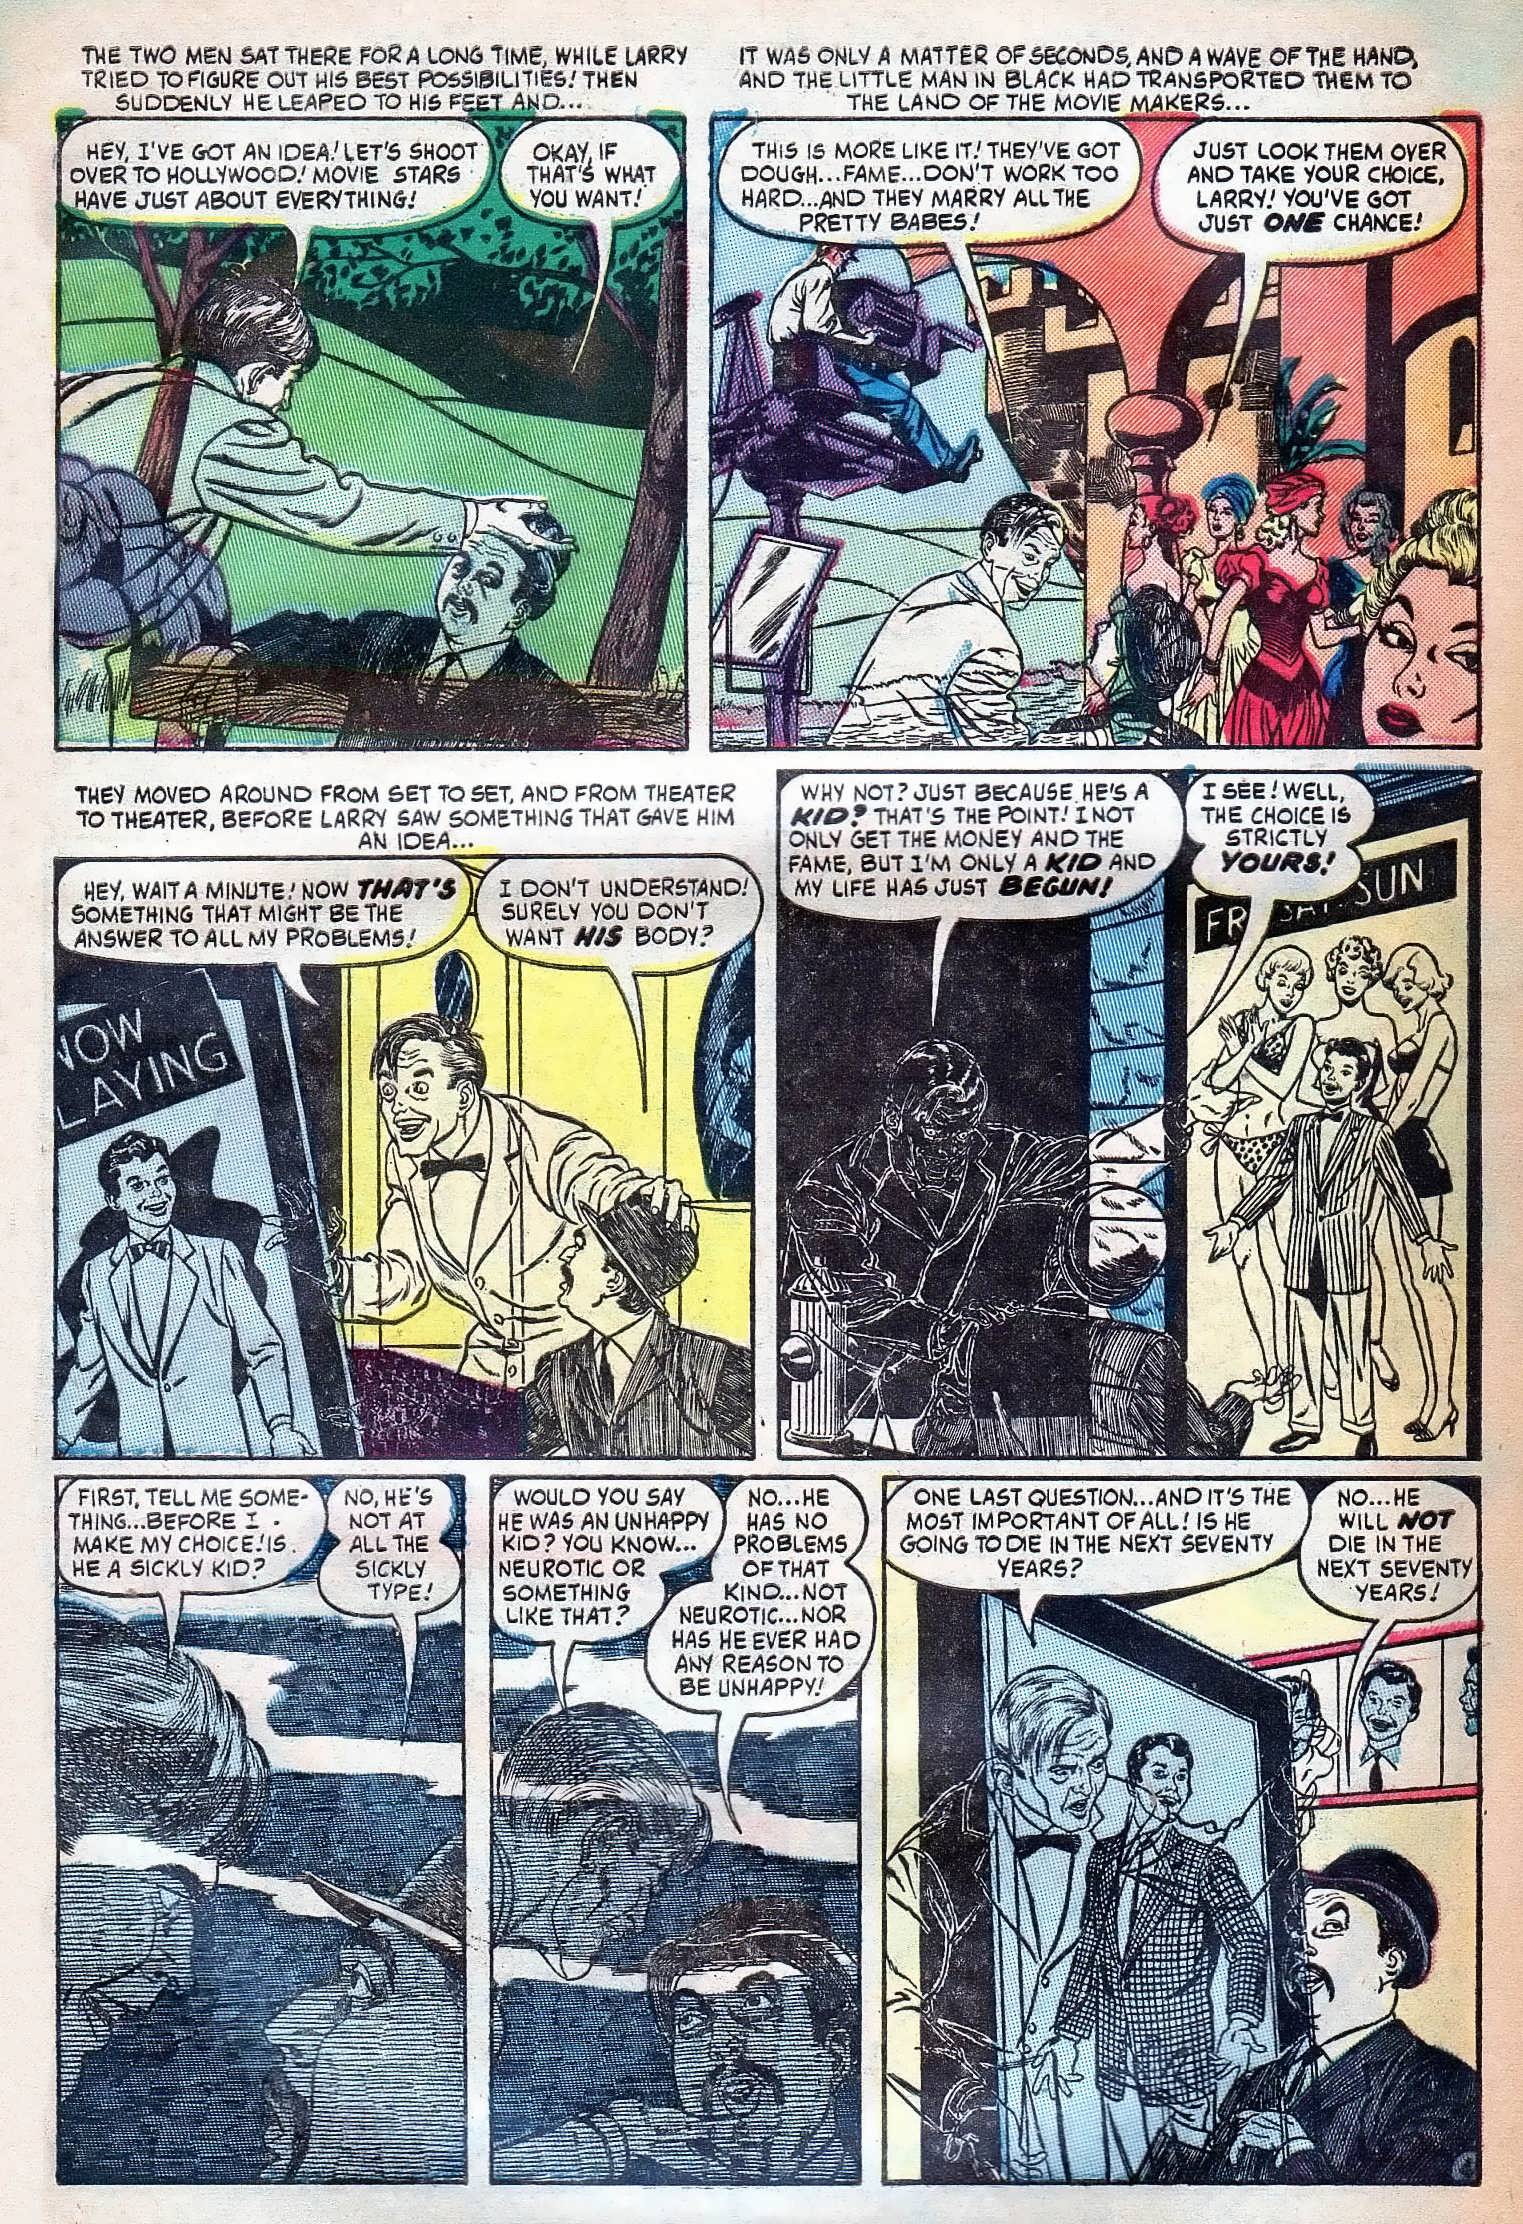 Marvel Tales (1949) 124 Page 30